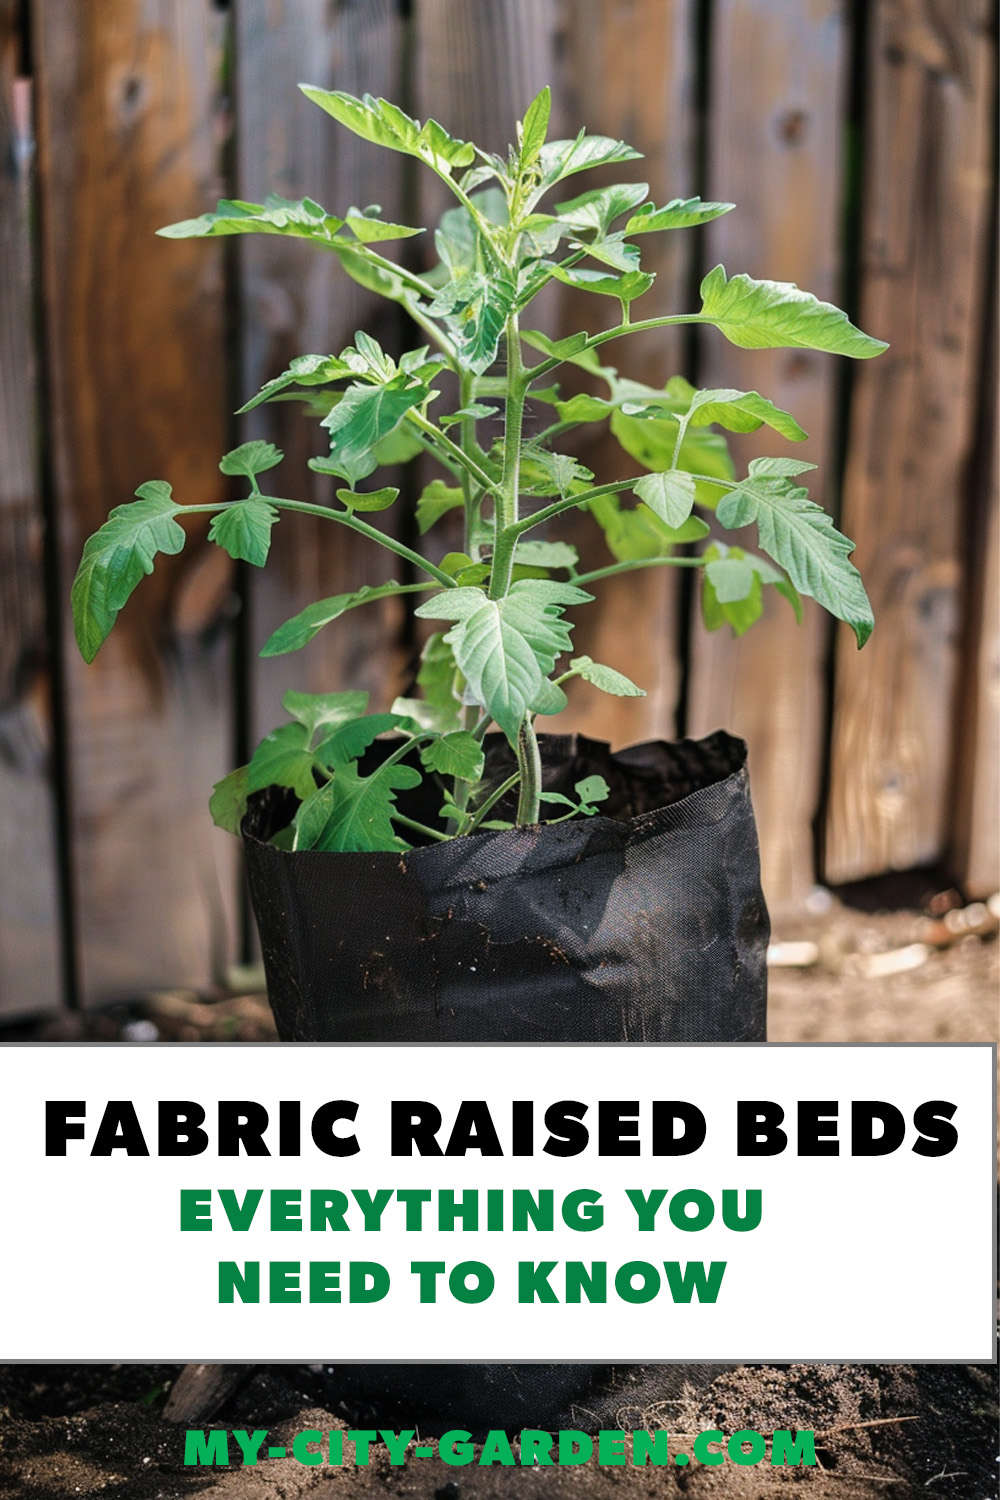 Easy instructions for growing in fabric raised garden beds